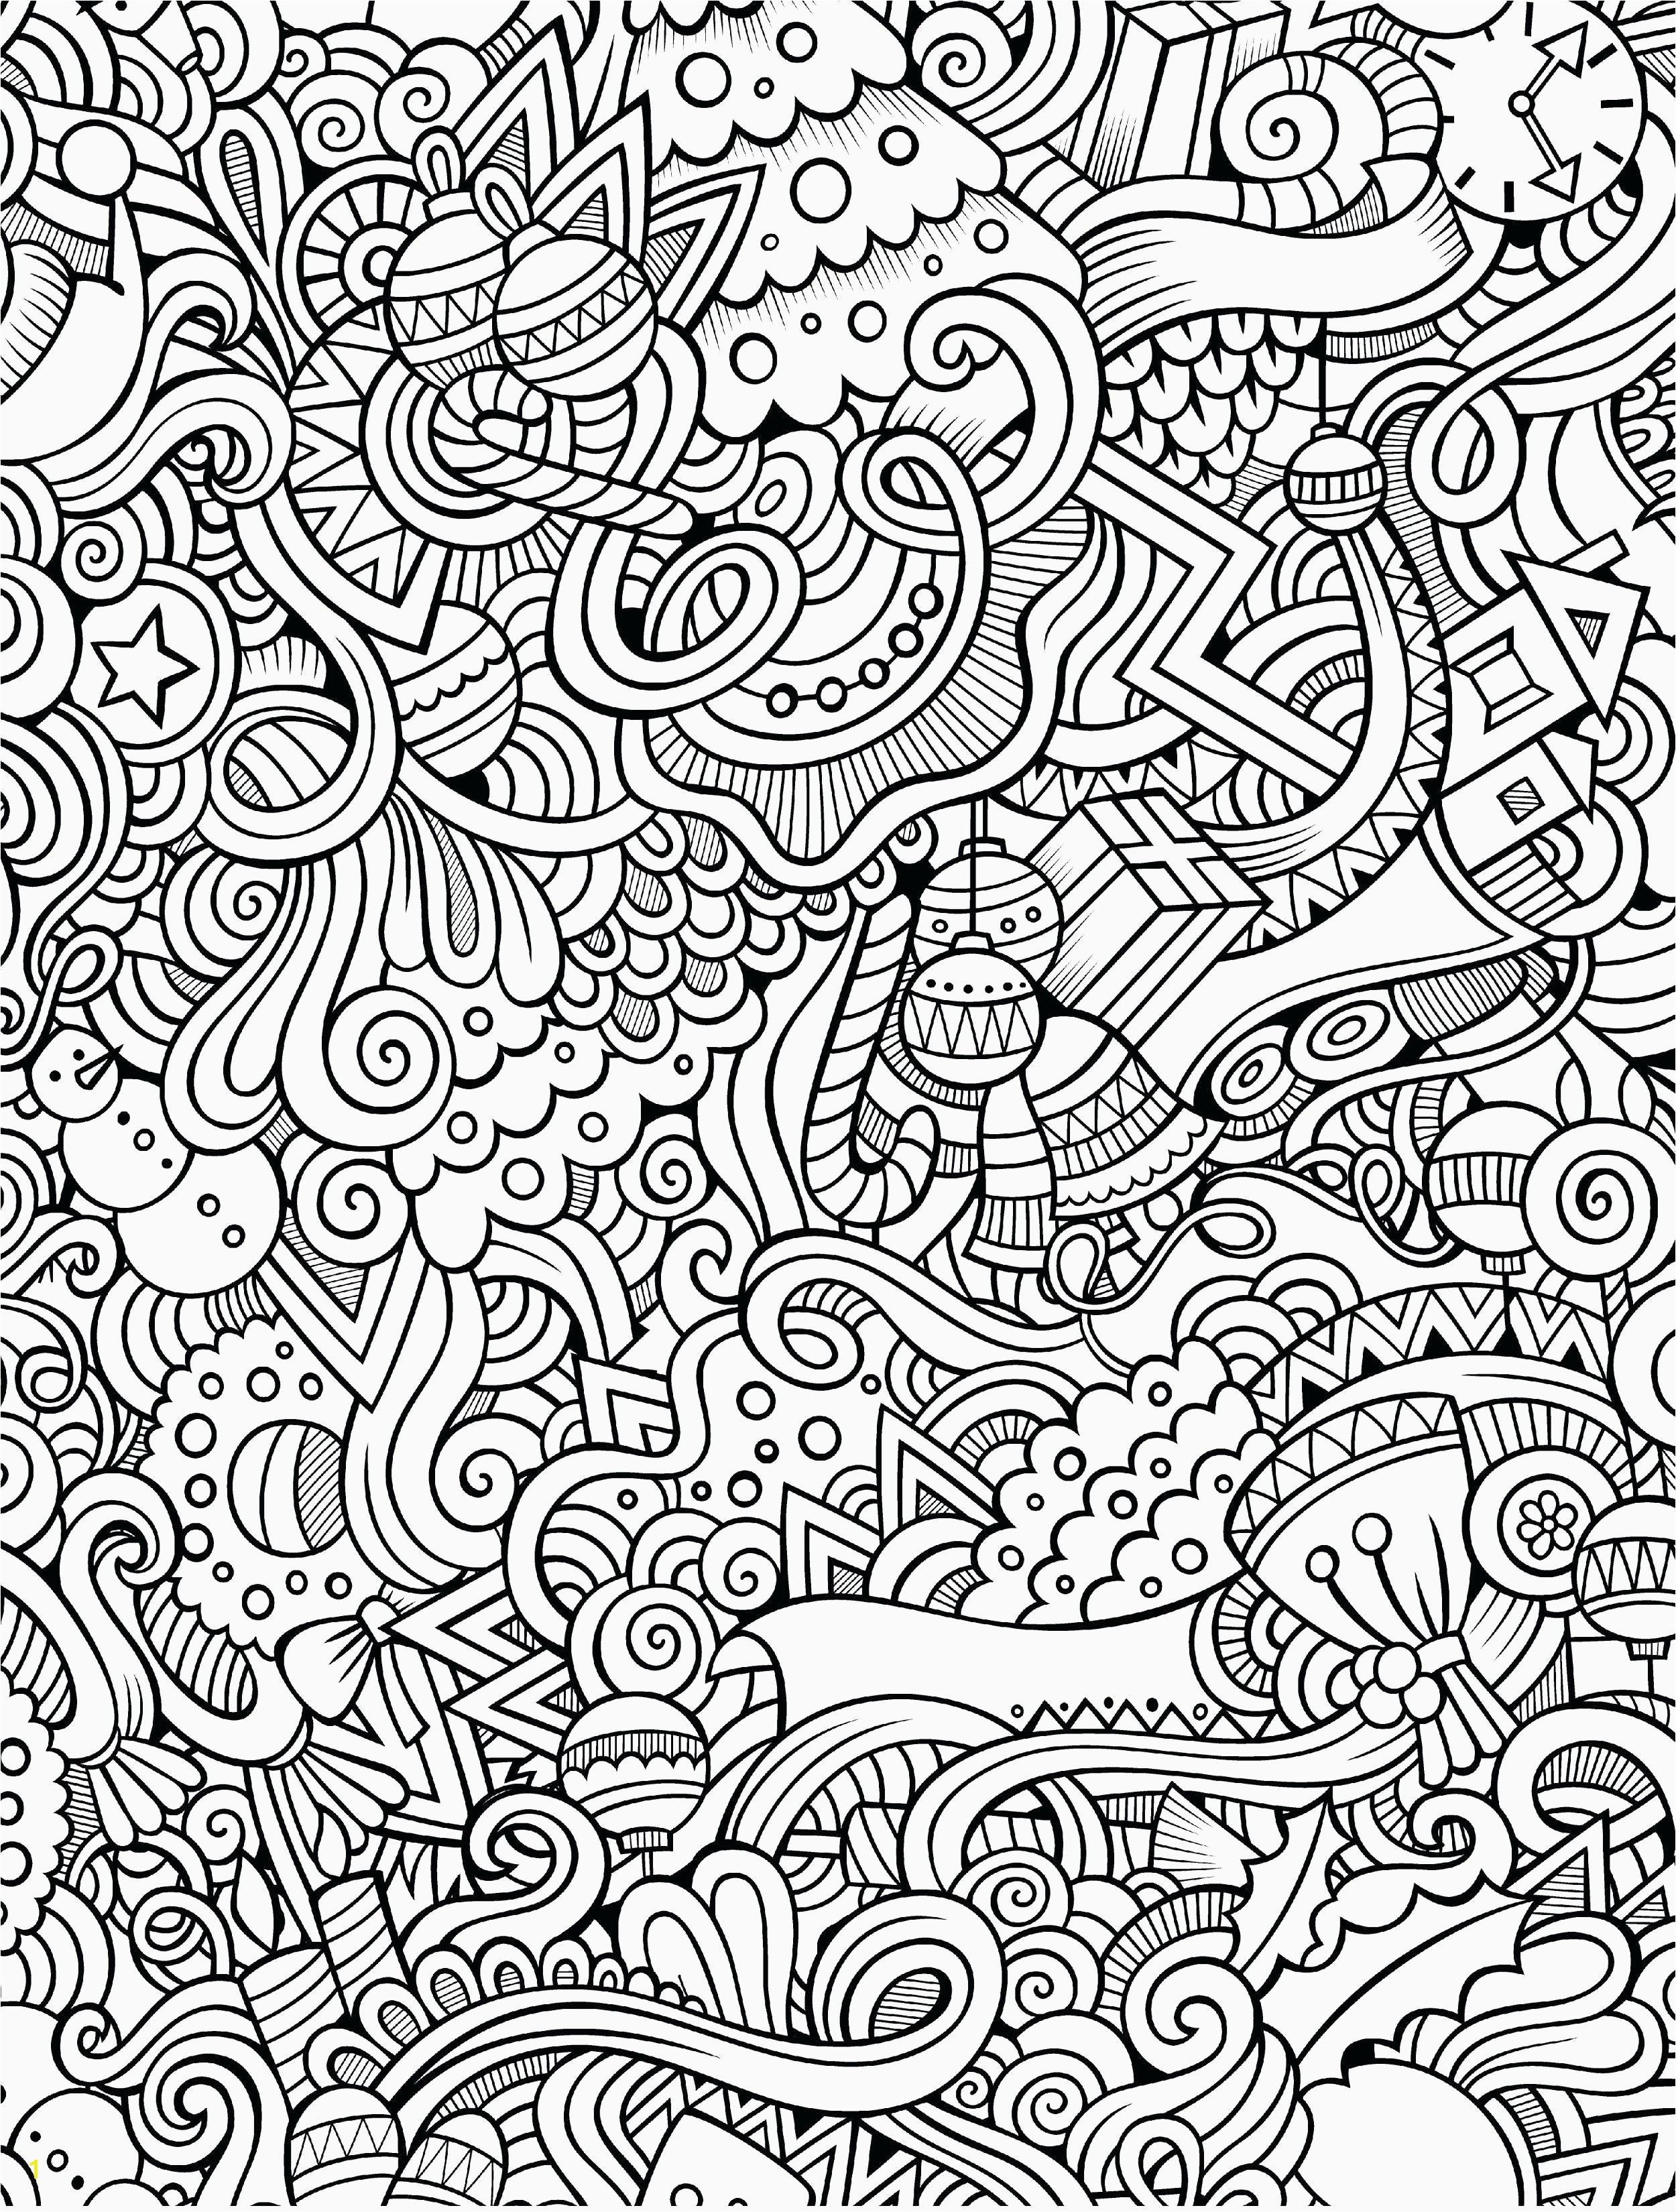 Free Printable Complex Coloring Pages for Adults Elegant Awesome Printable Coloring Pages for Adults